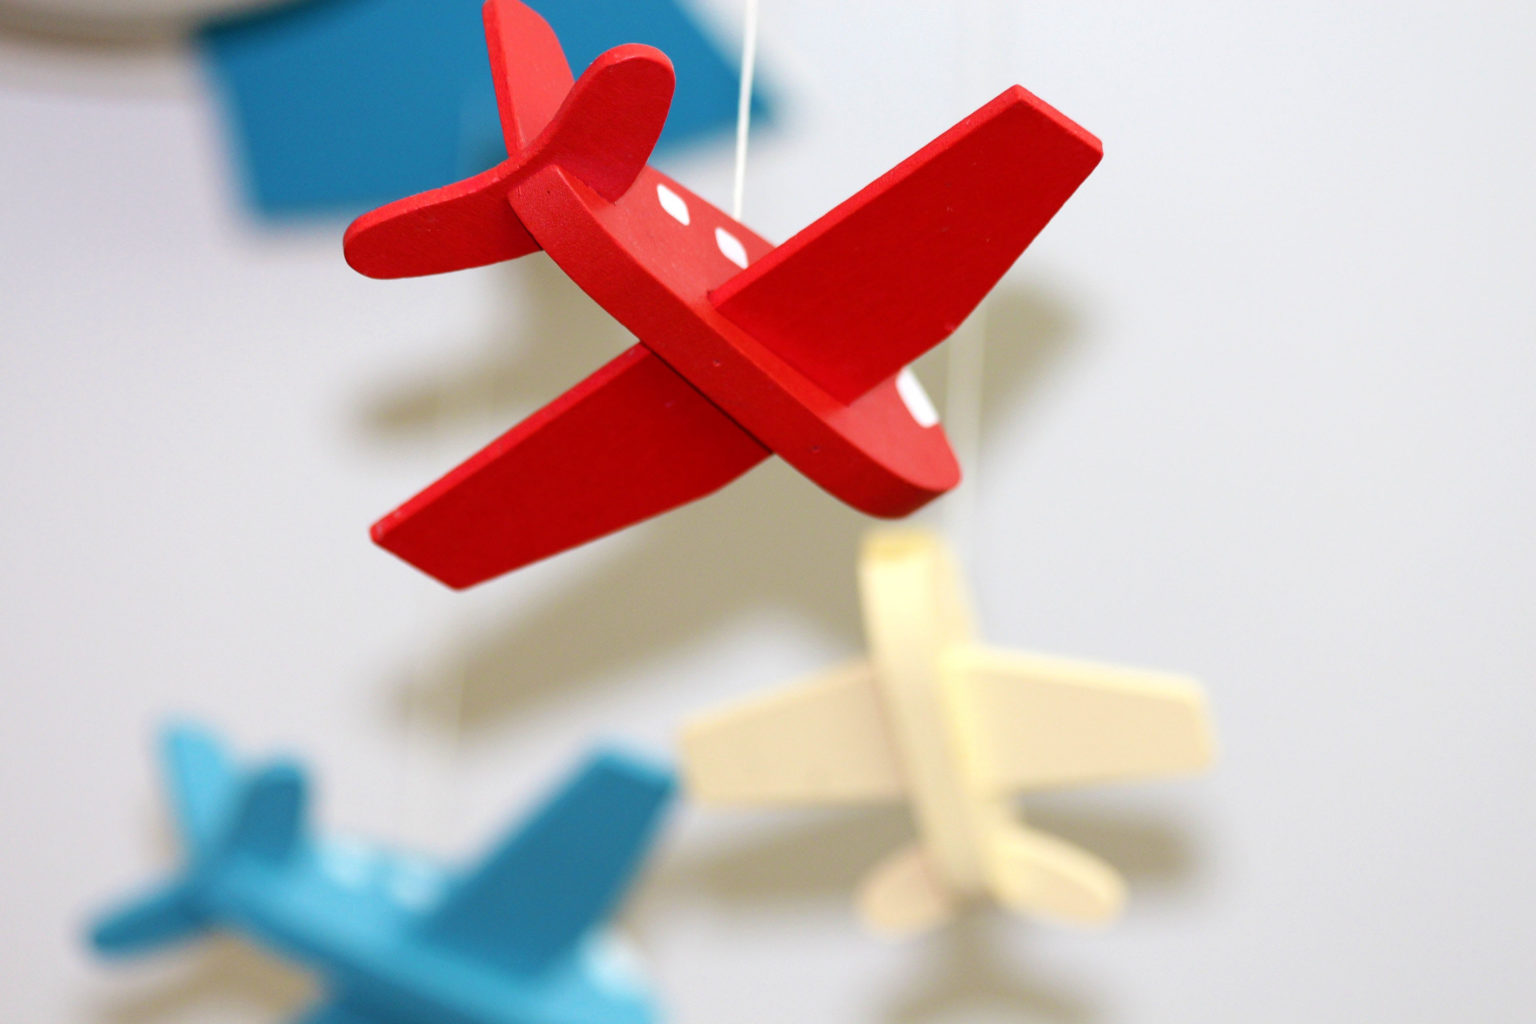 Toy plane with vibrance